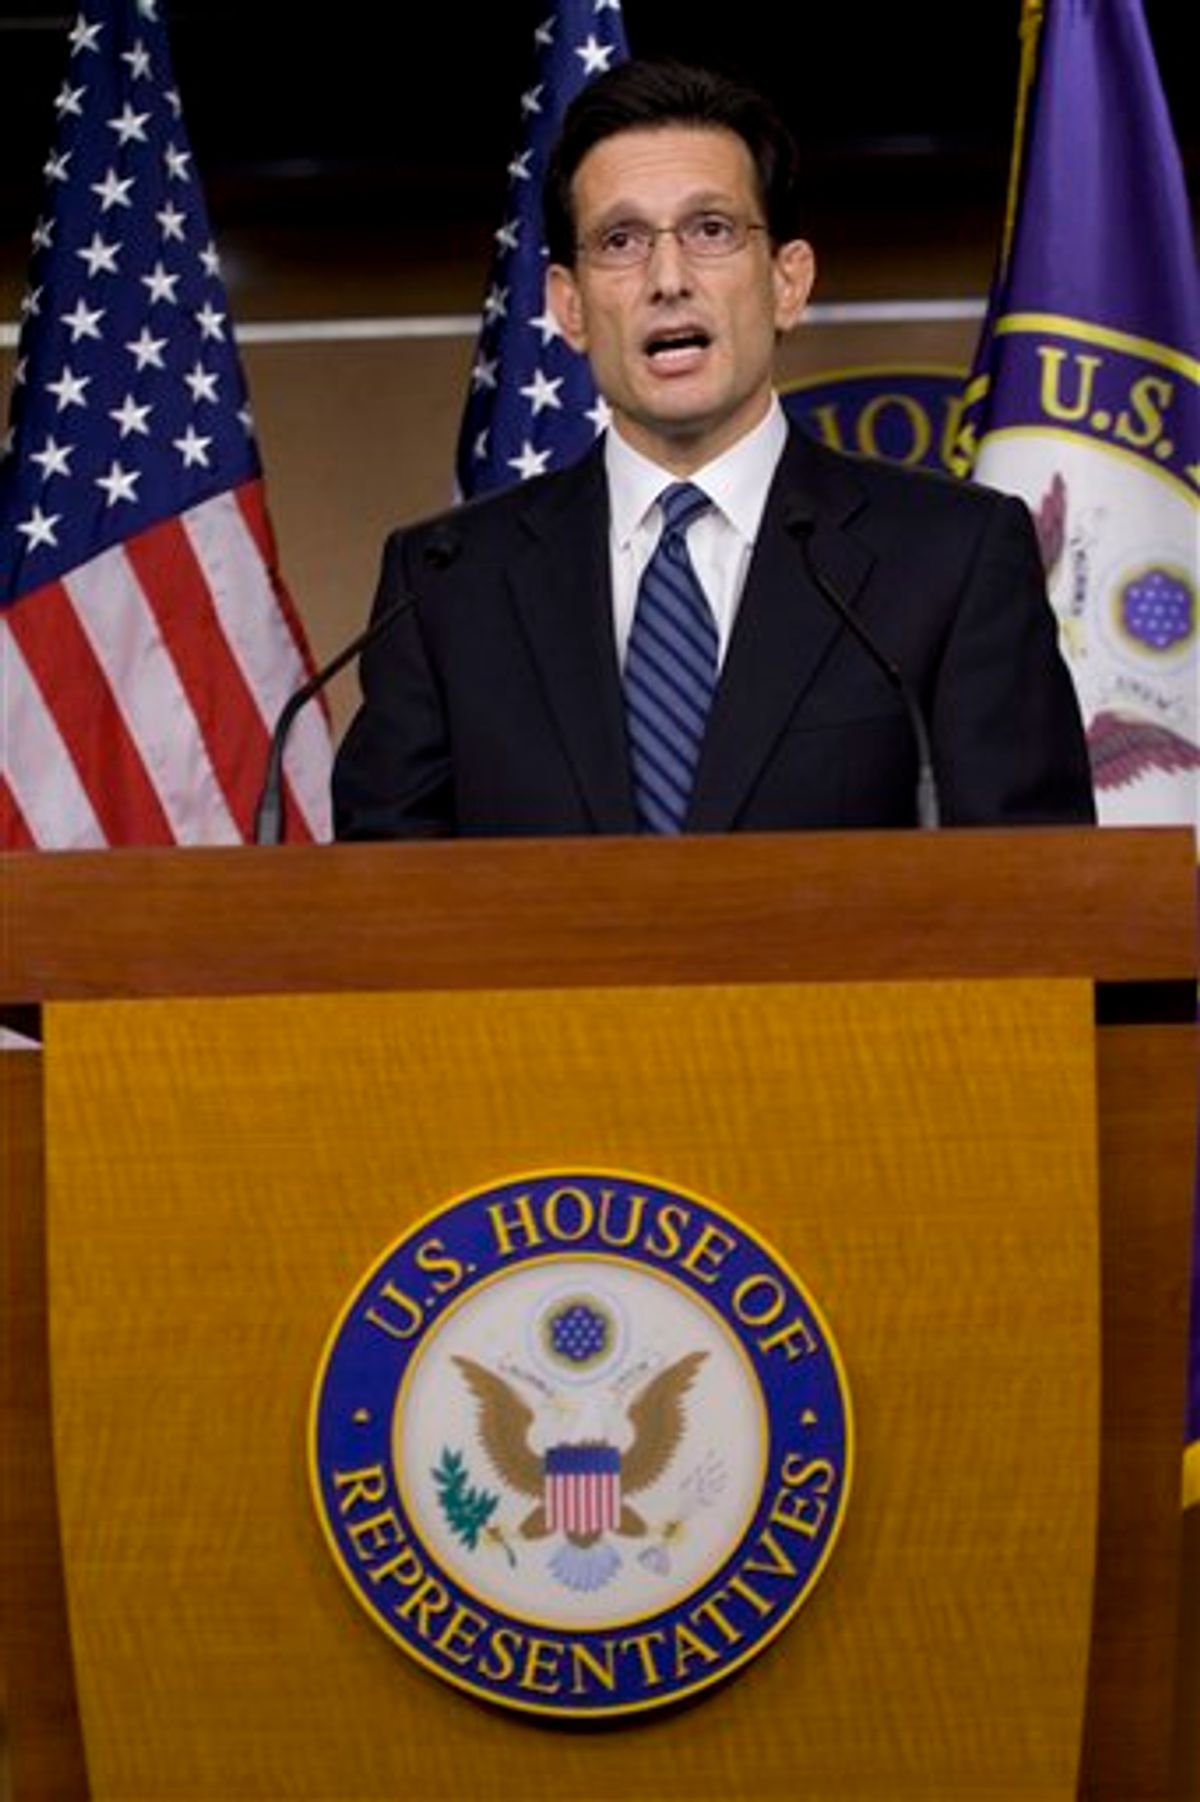 House Minority Whip Eric Cantor of Va. makes a statement to reporters on Capitol Hill in Washington, Thursday, March 25, 2010. (AP Photo/Harry Hamburg) (AP)